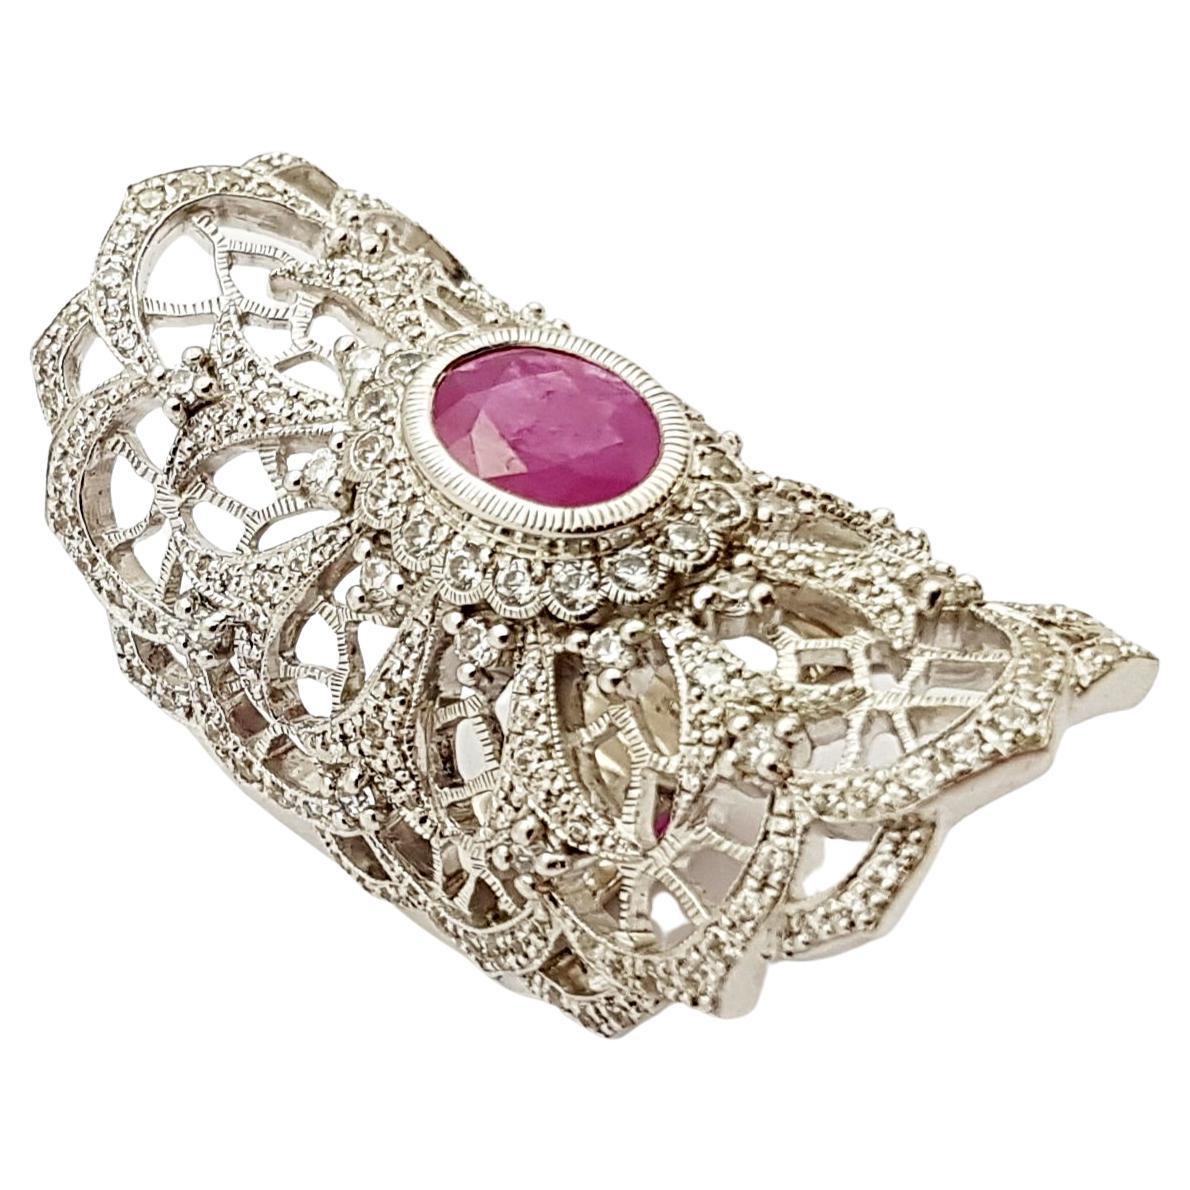 Ruby 1.51 carats with Cubic Zirconia Ring set in Silver Settings

Width:  2.0 cm 
Length: 4.2 cm
Ring Size: 55
Total Weight: 20.65 grams

*Please note that the silver setting is plated with rhodium to promote shine and help prevent oxidation. 